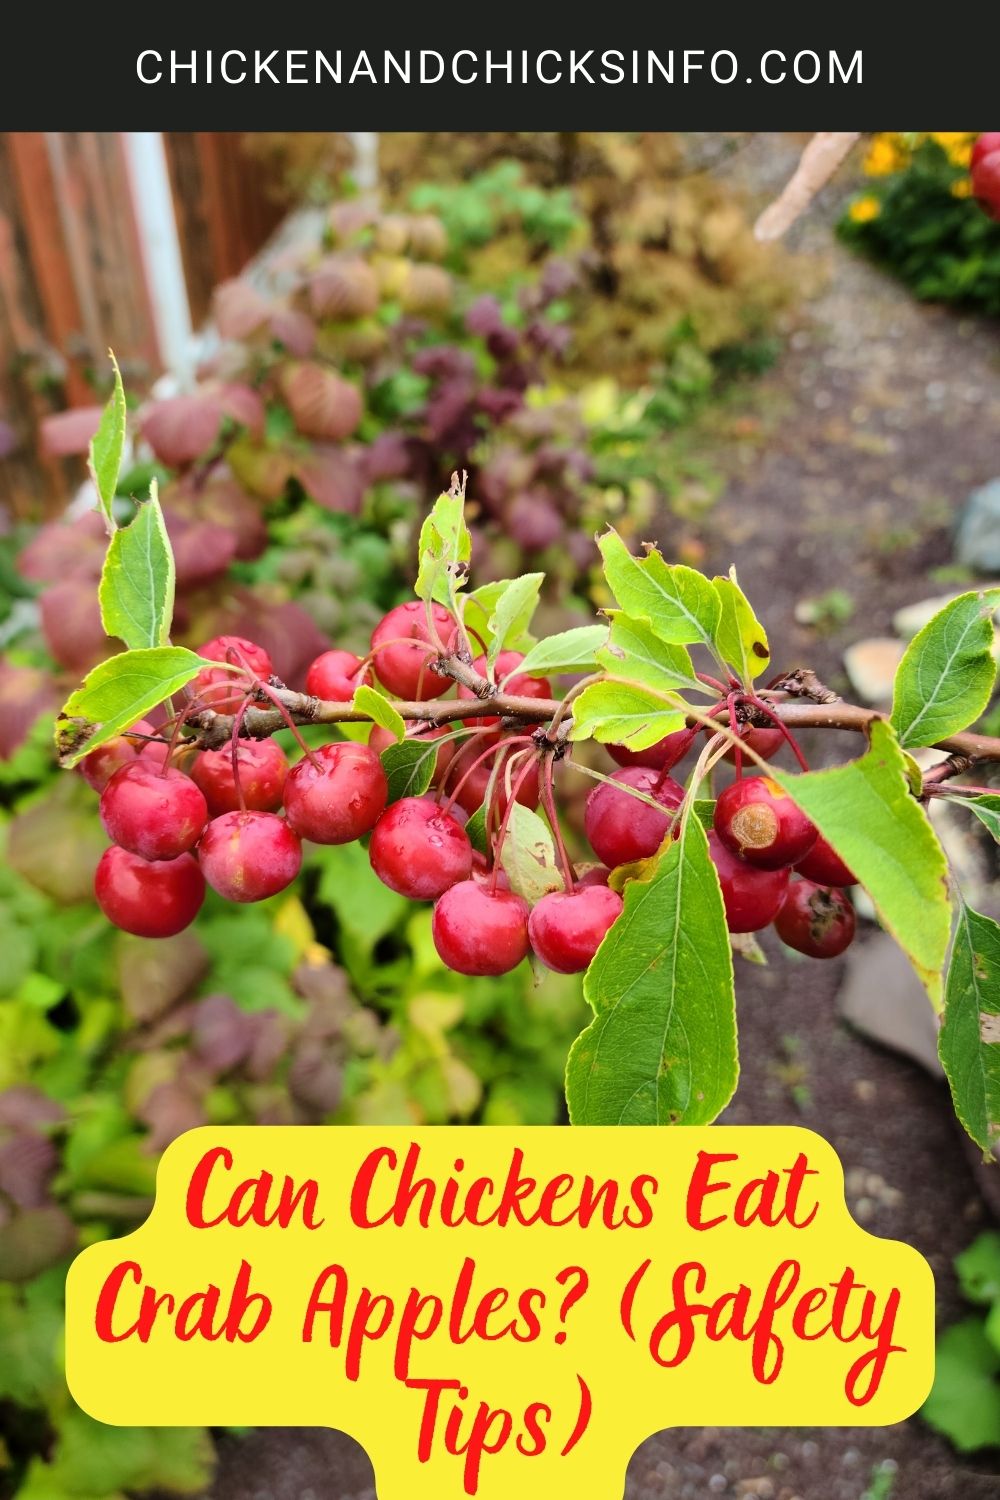 Can Chickens Eat Crab Apples? (Safety Tips) poster.
